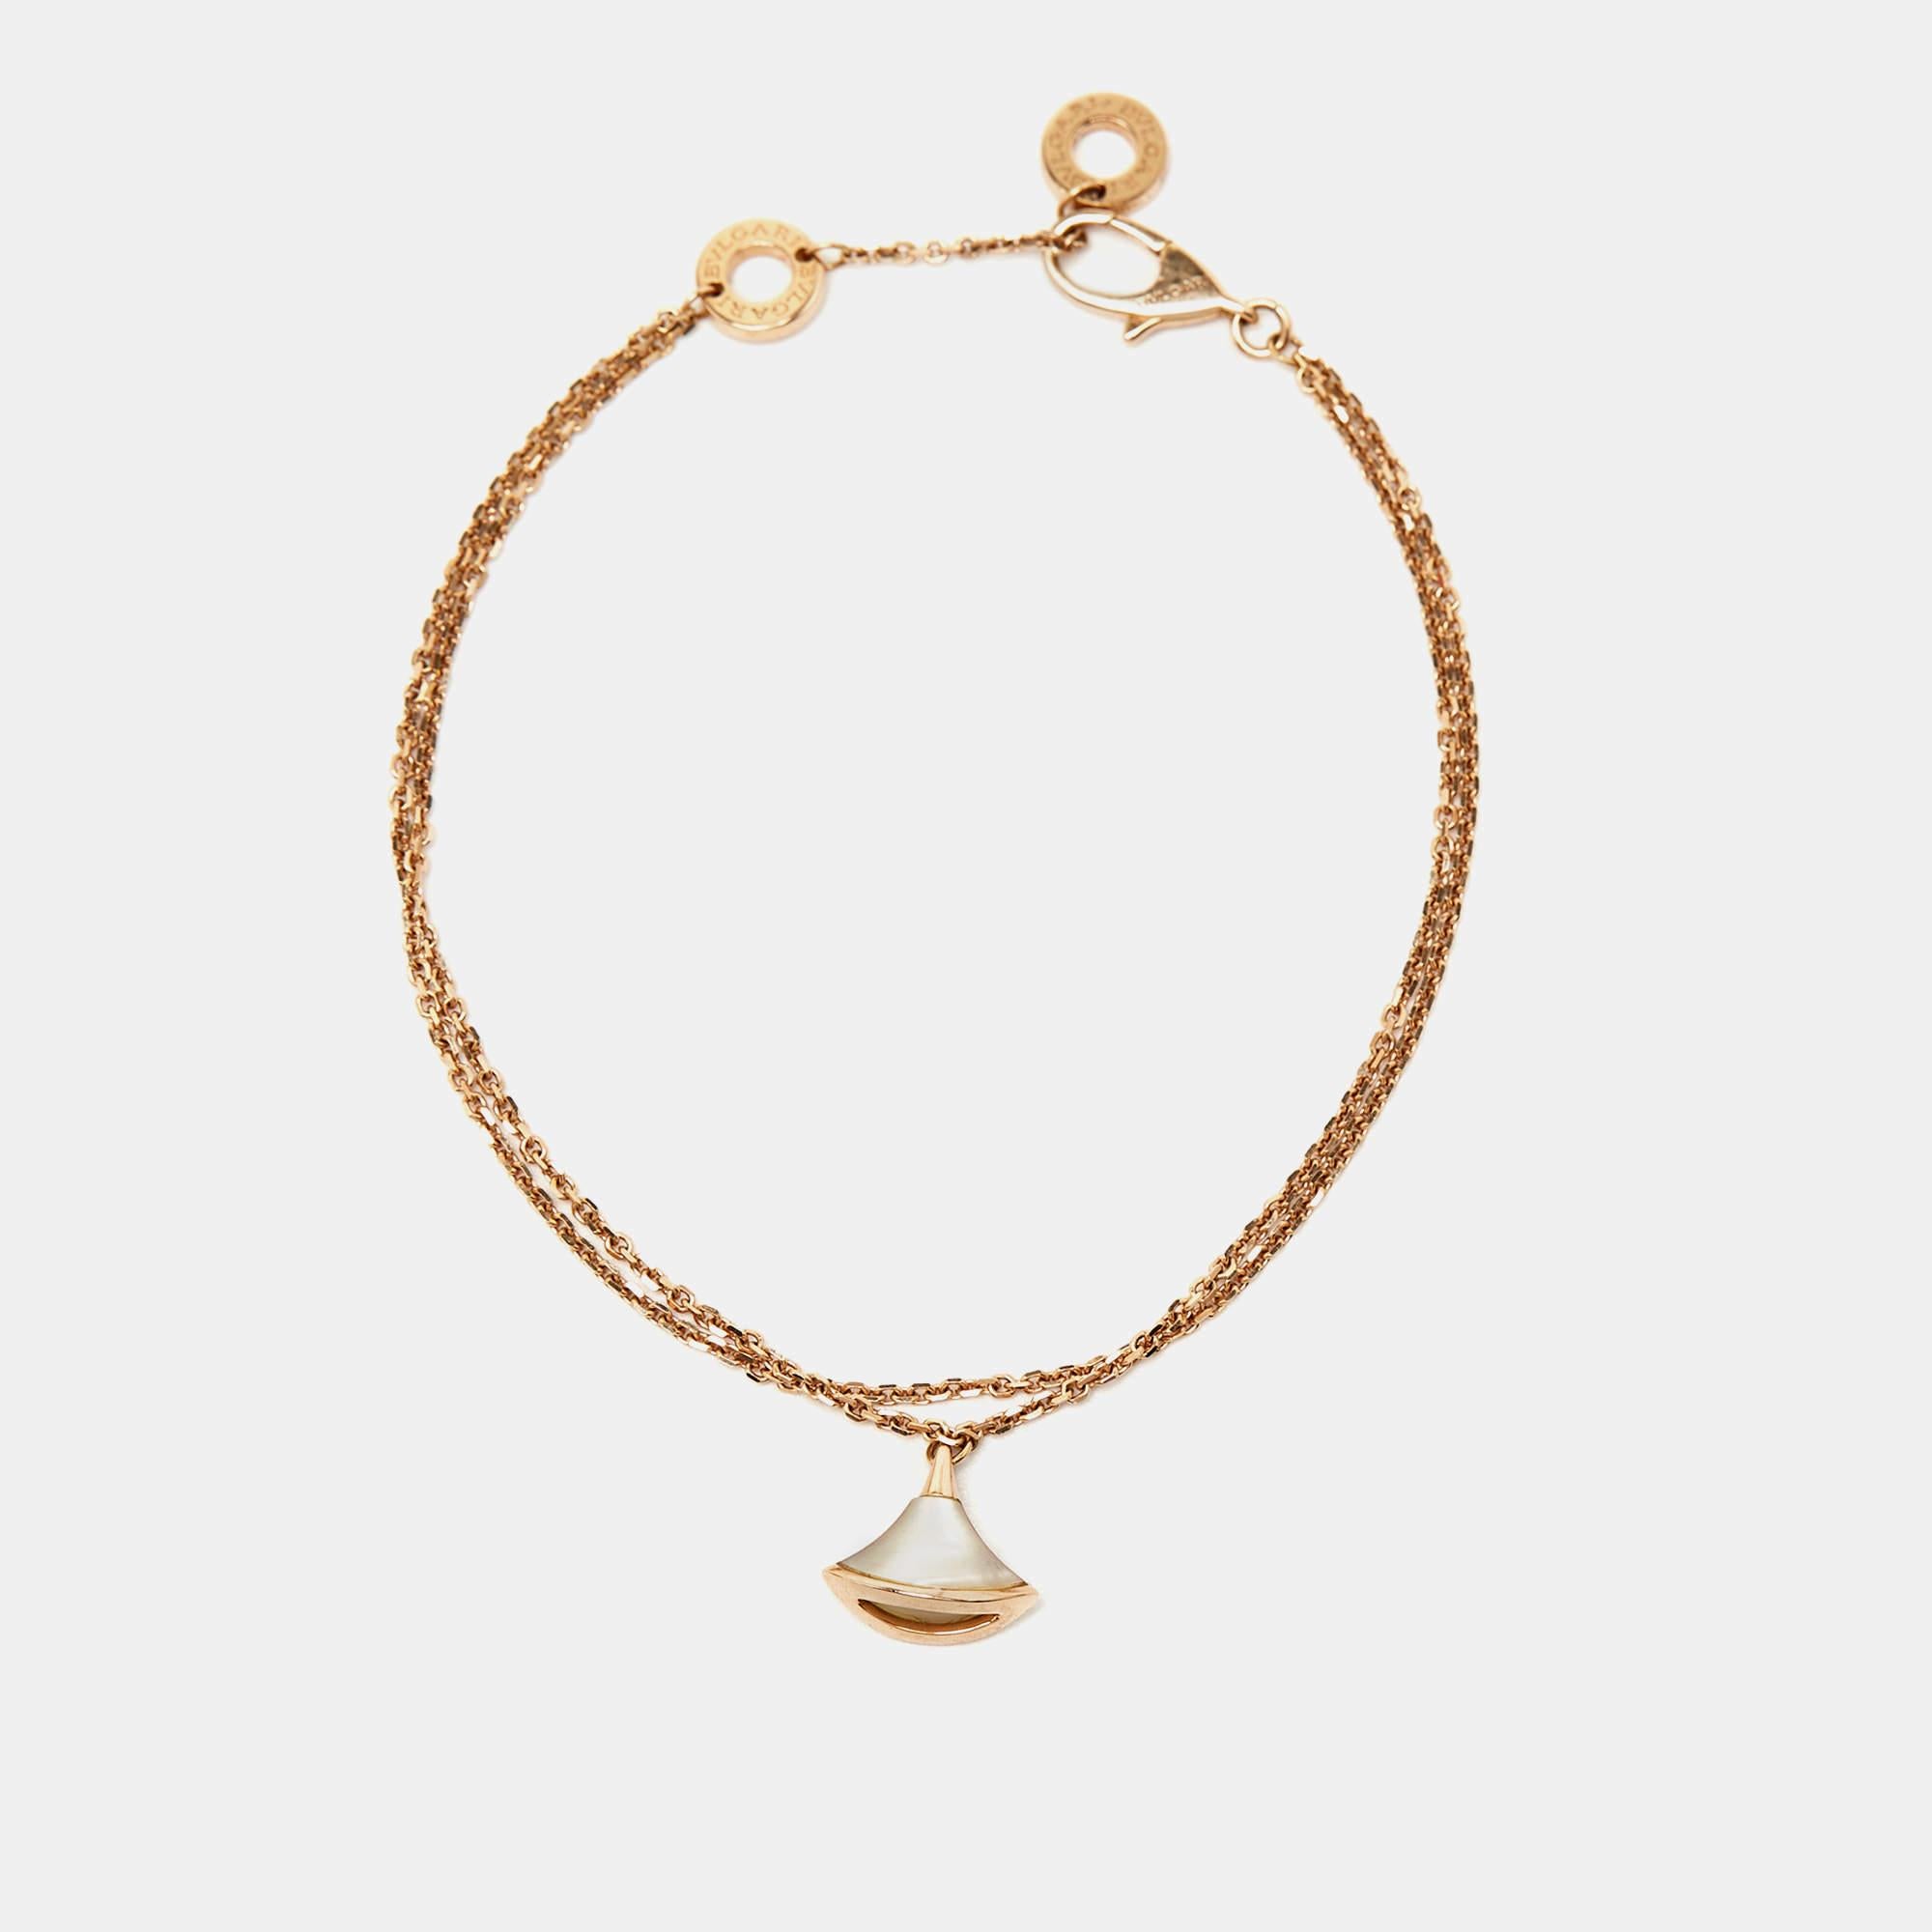 The grandeur of Italian beauty is reflected in this bracelet from Bvlgari's Divas' Dream collection. The line is inspired by the fan-shaped mosaics of the Caracalla Baths in Rome, a detail the brand has interpreted with mastery.

